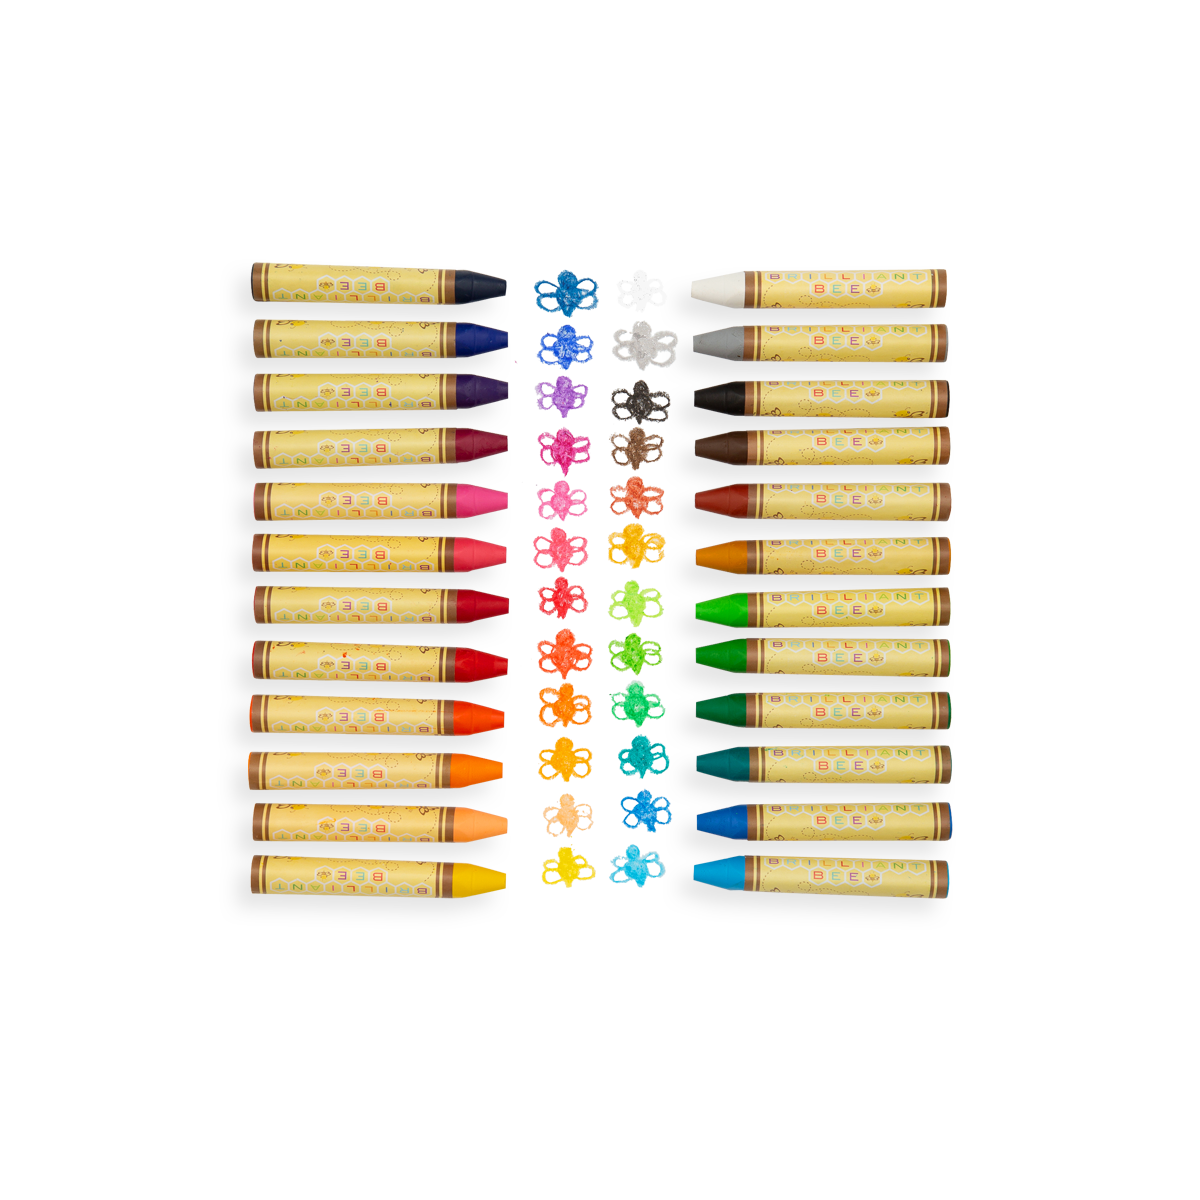 Brilliant Bee Crayons lined up with their color swatches